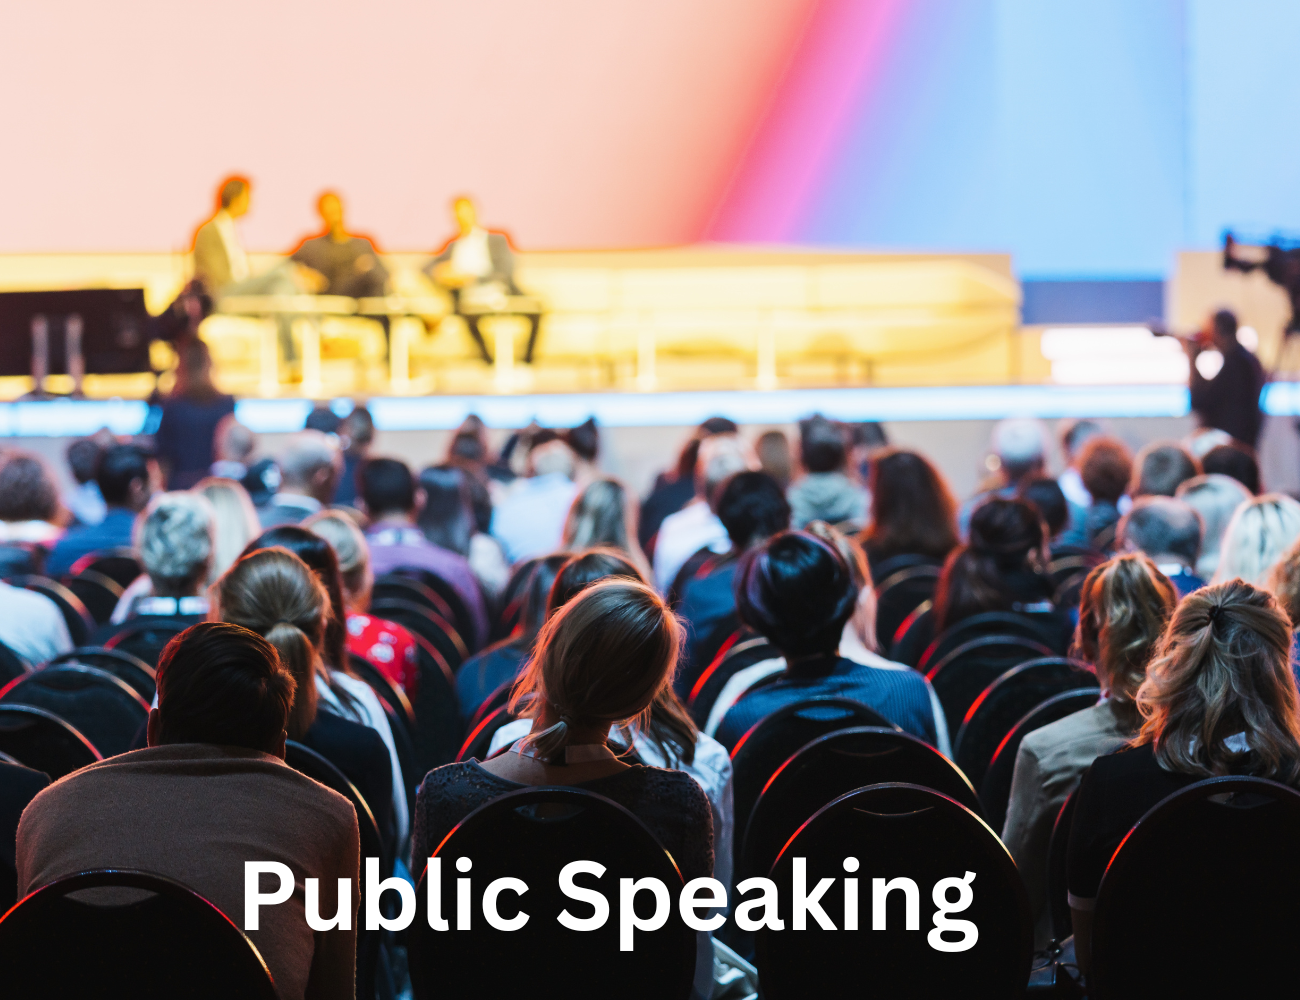 Public Speaking at Work - How to Communicate with Confidence, Online Event